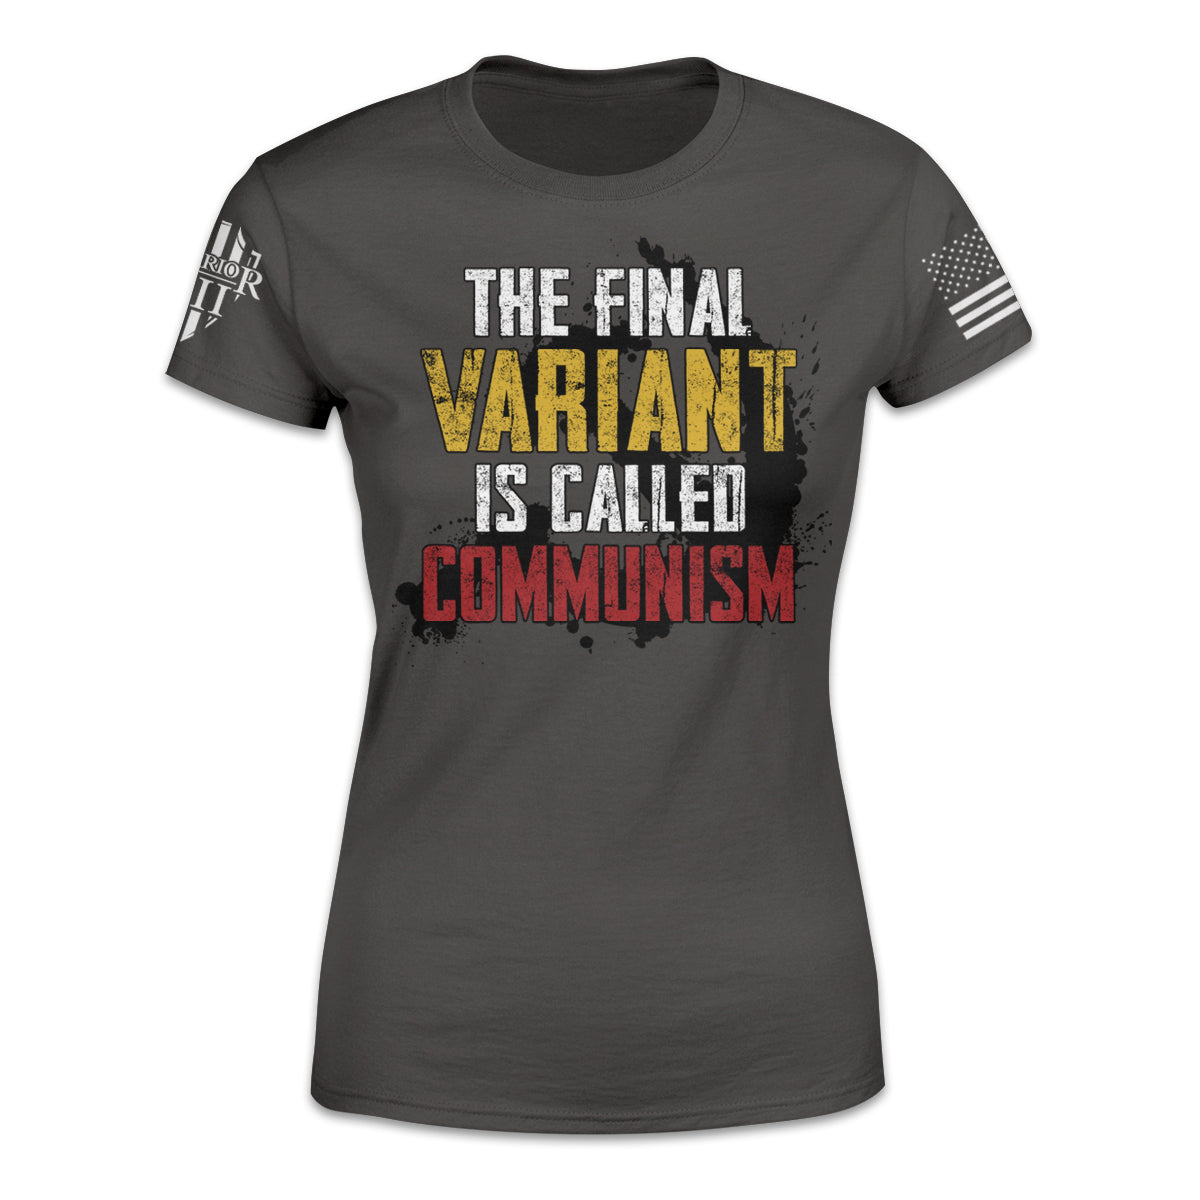 A grey women's relaxed fit shirt with the words "The final variant is called communism" printed on the front.